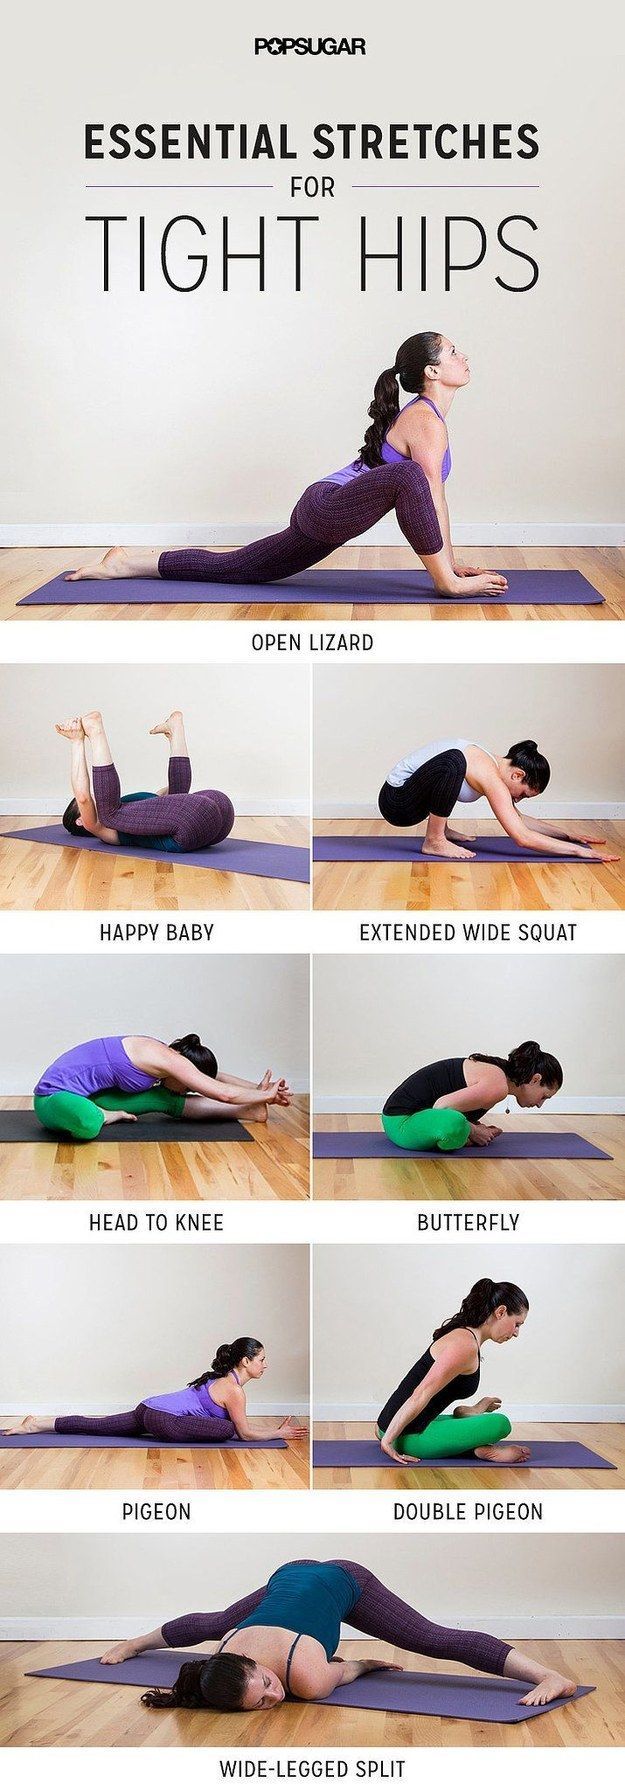 For opening up your hips. | 29 Diagrams To Help You Get In Shape